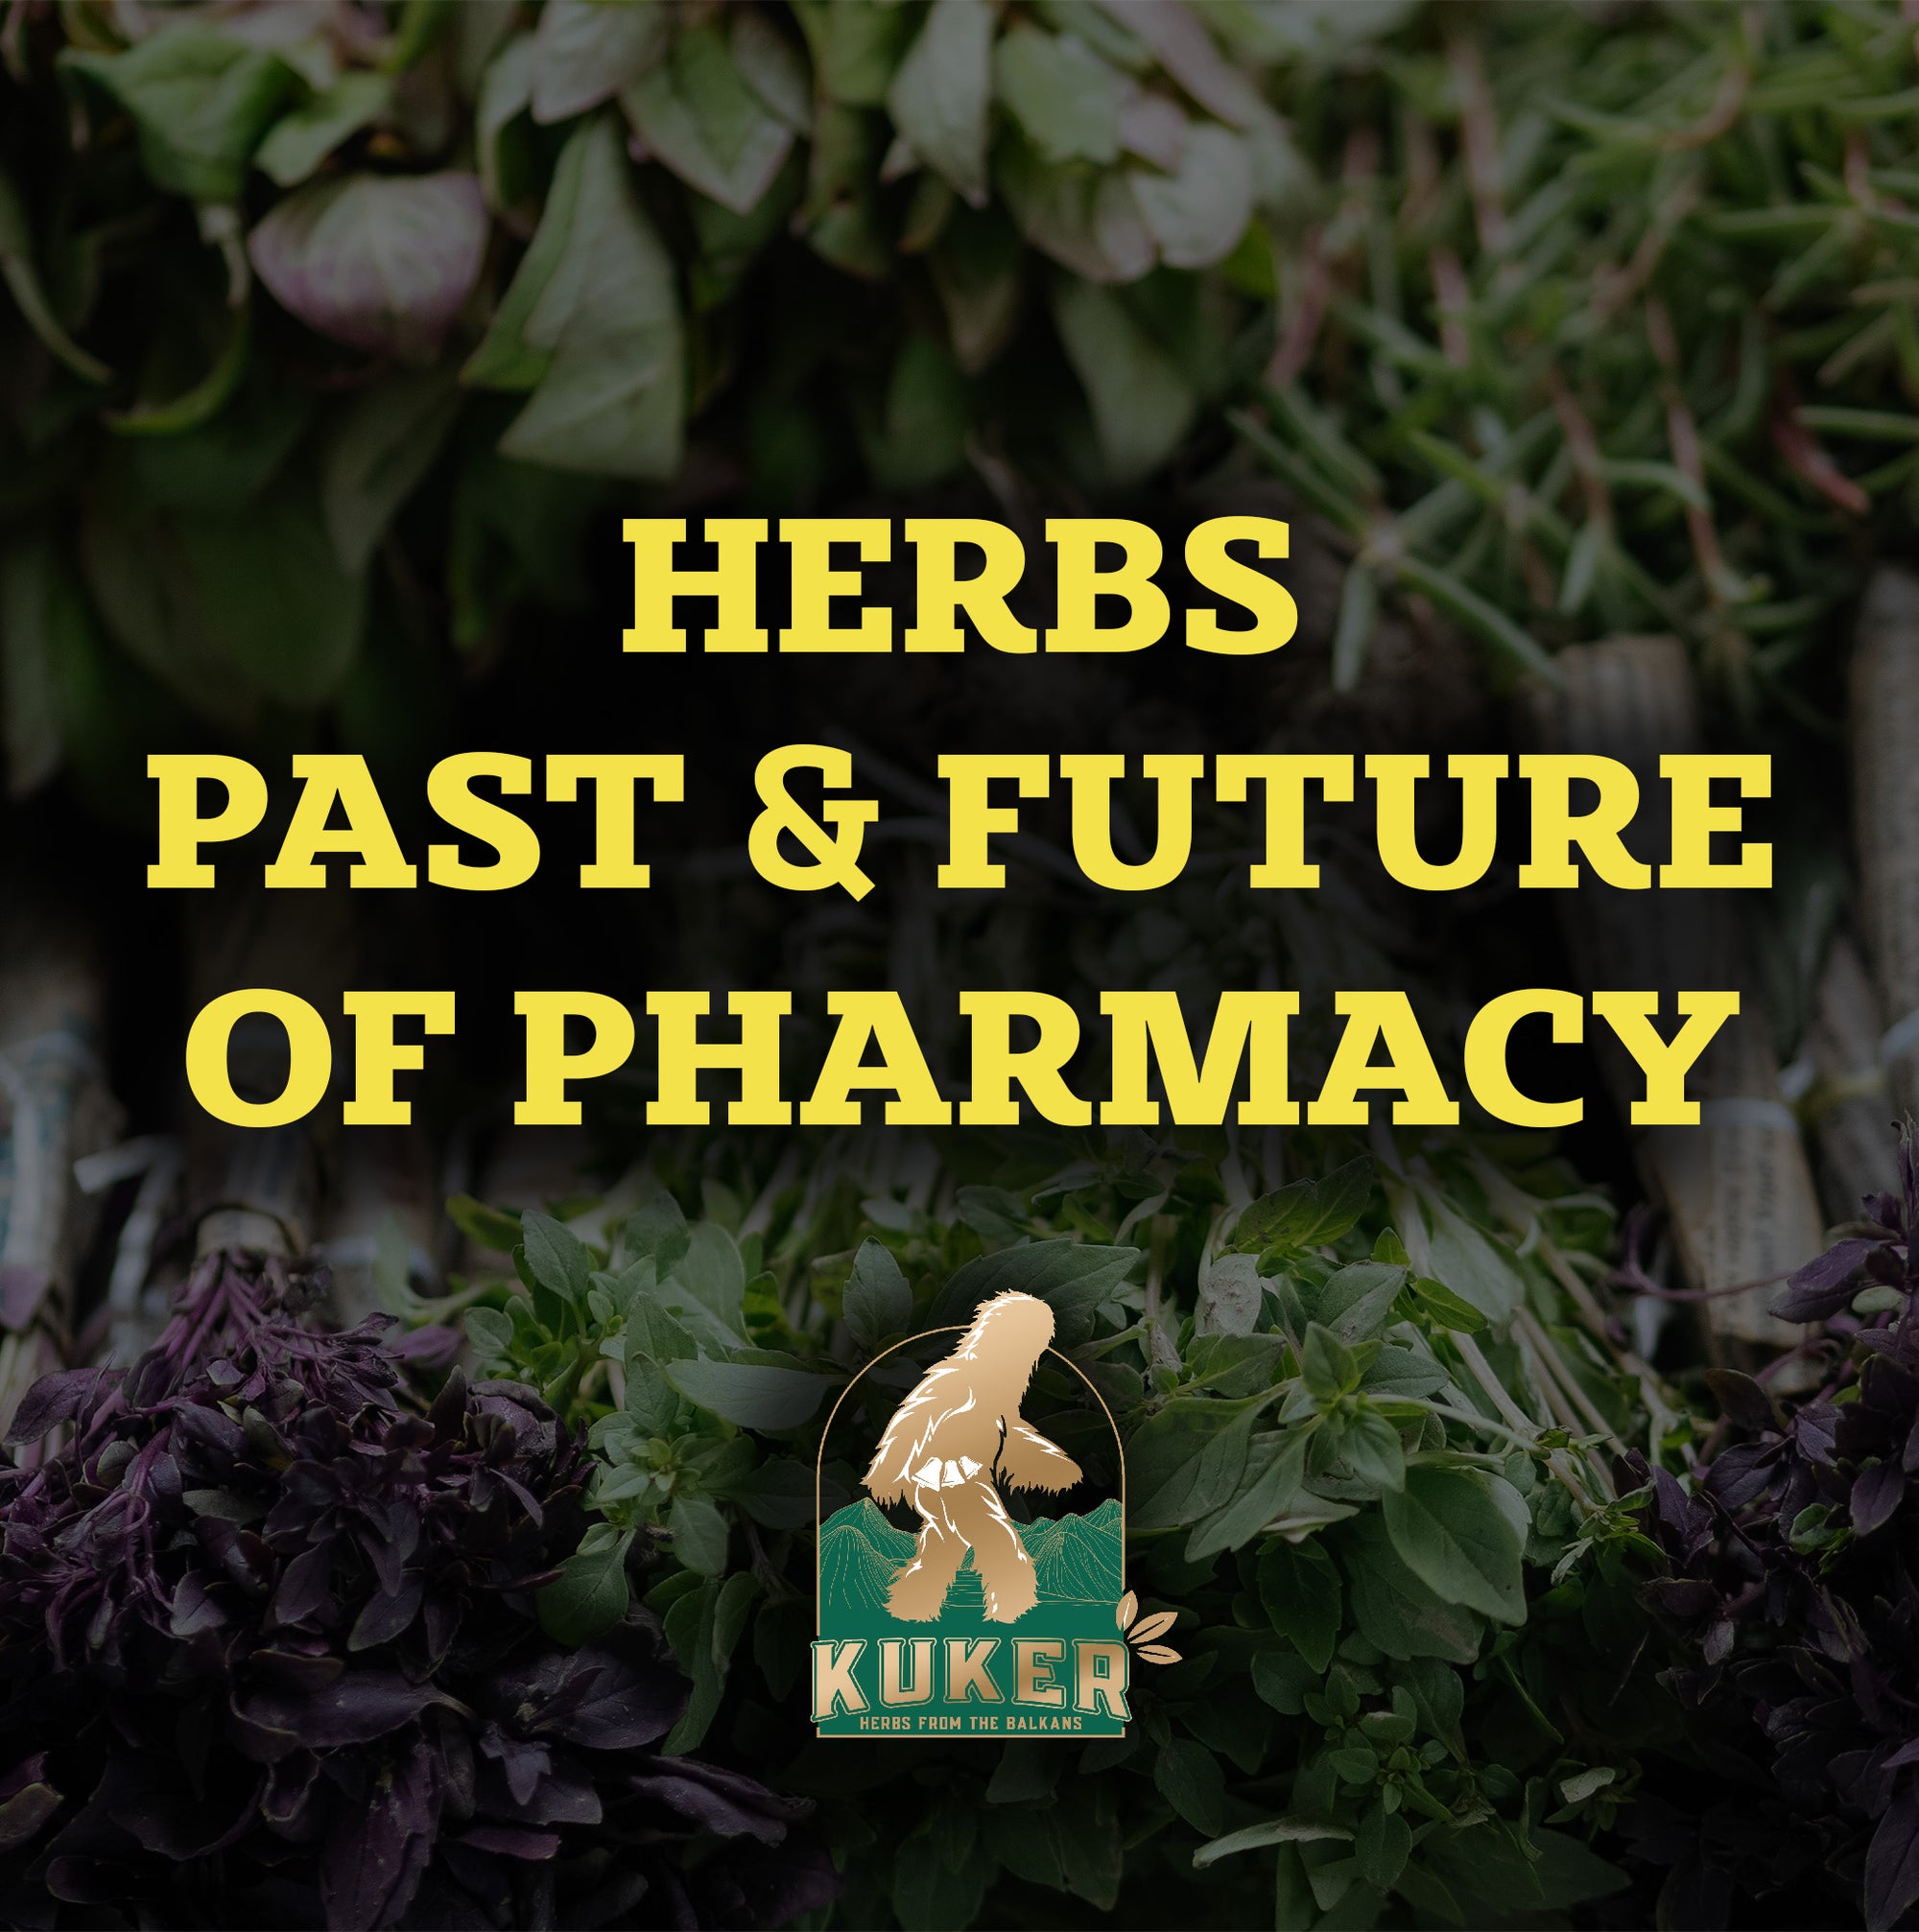 Herbs - The Past and Future of Pharmacy